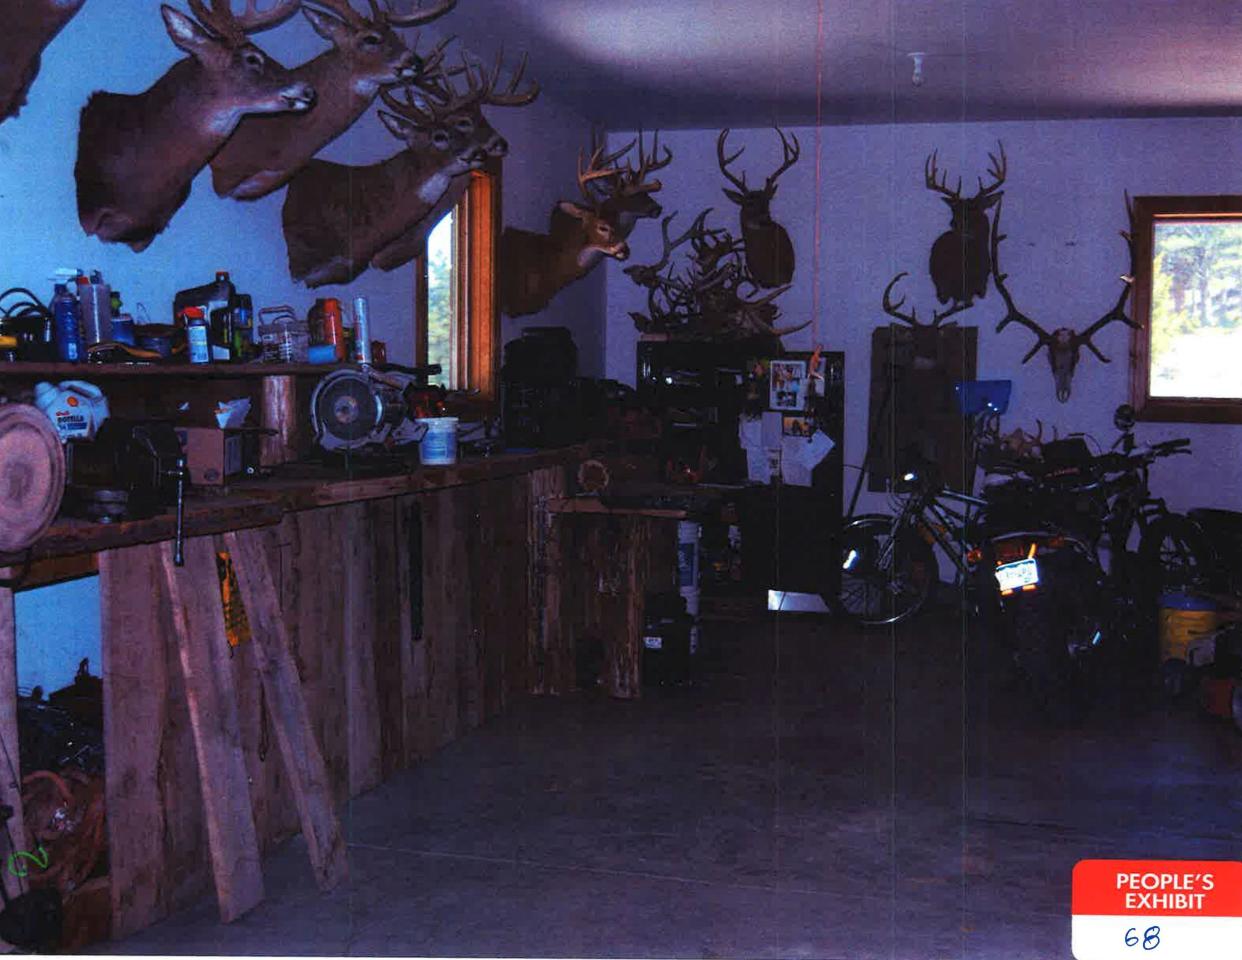 The inside of the Morphew family's garage with Barry's collection of deer heads and a pile of antlers. / Credit: Chaffee County District Court